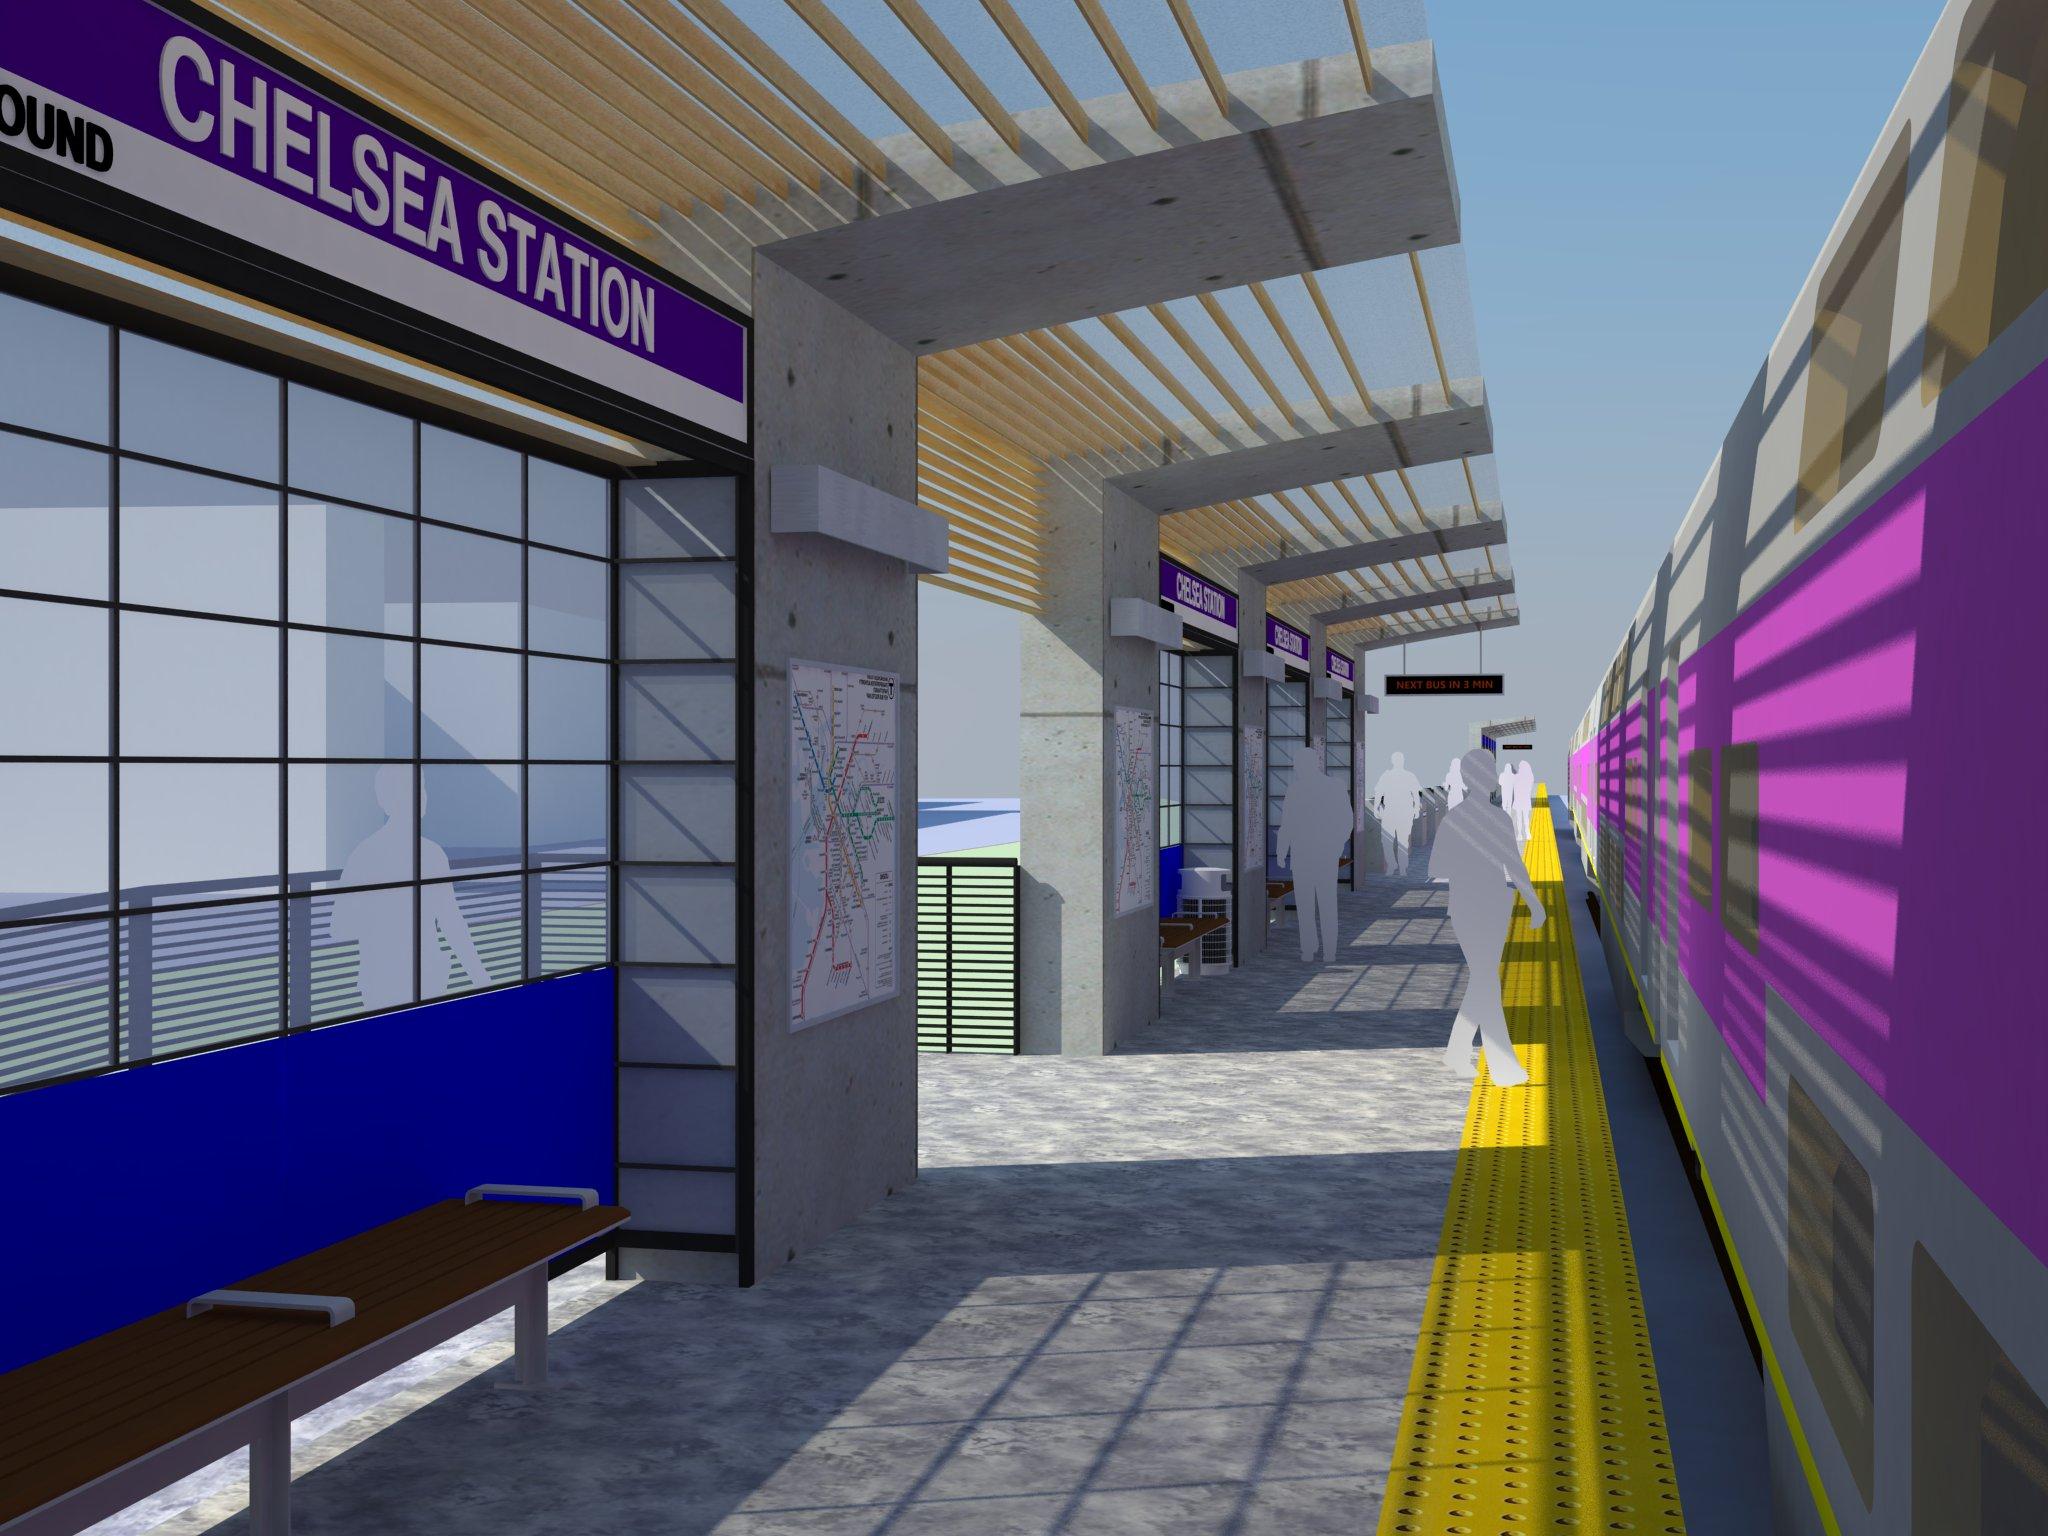 A rendering of the new Chelsea Commuter Rail Station, with a closeup view of the platform, canopy, and train pulled up.